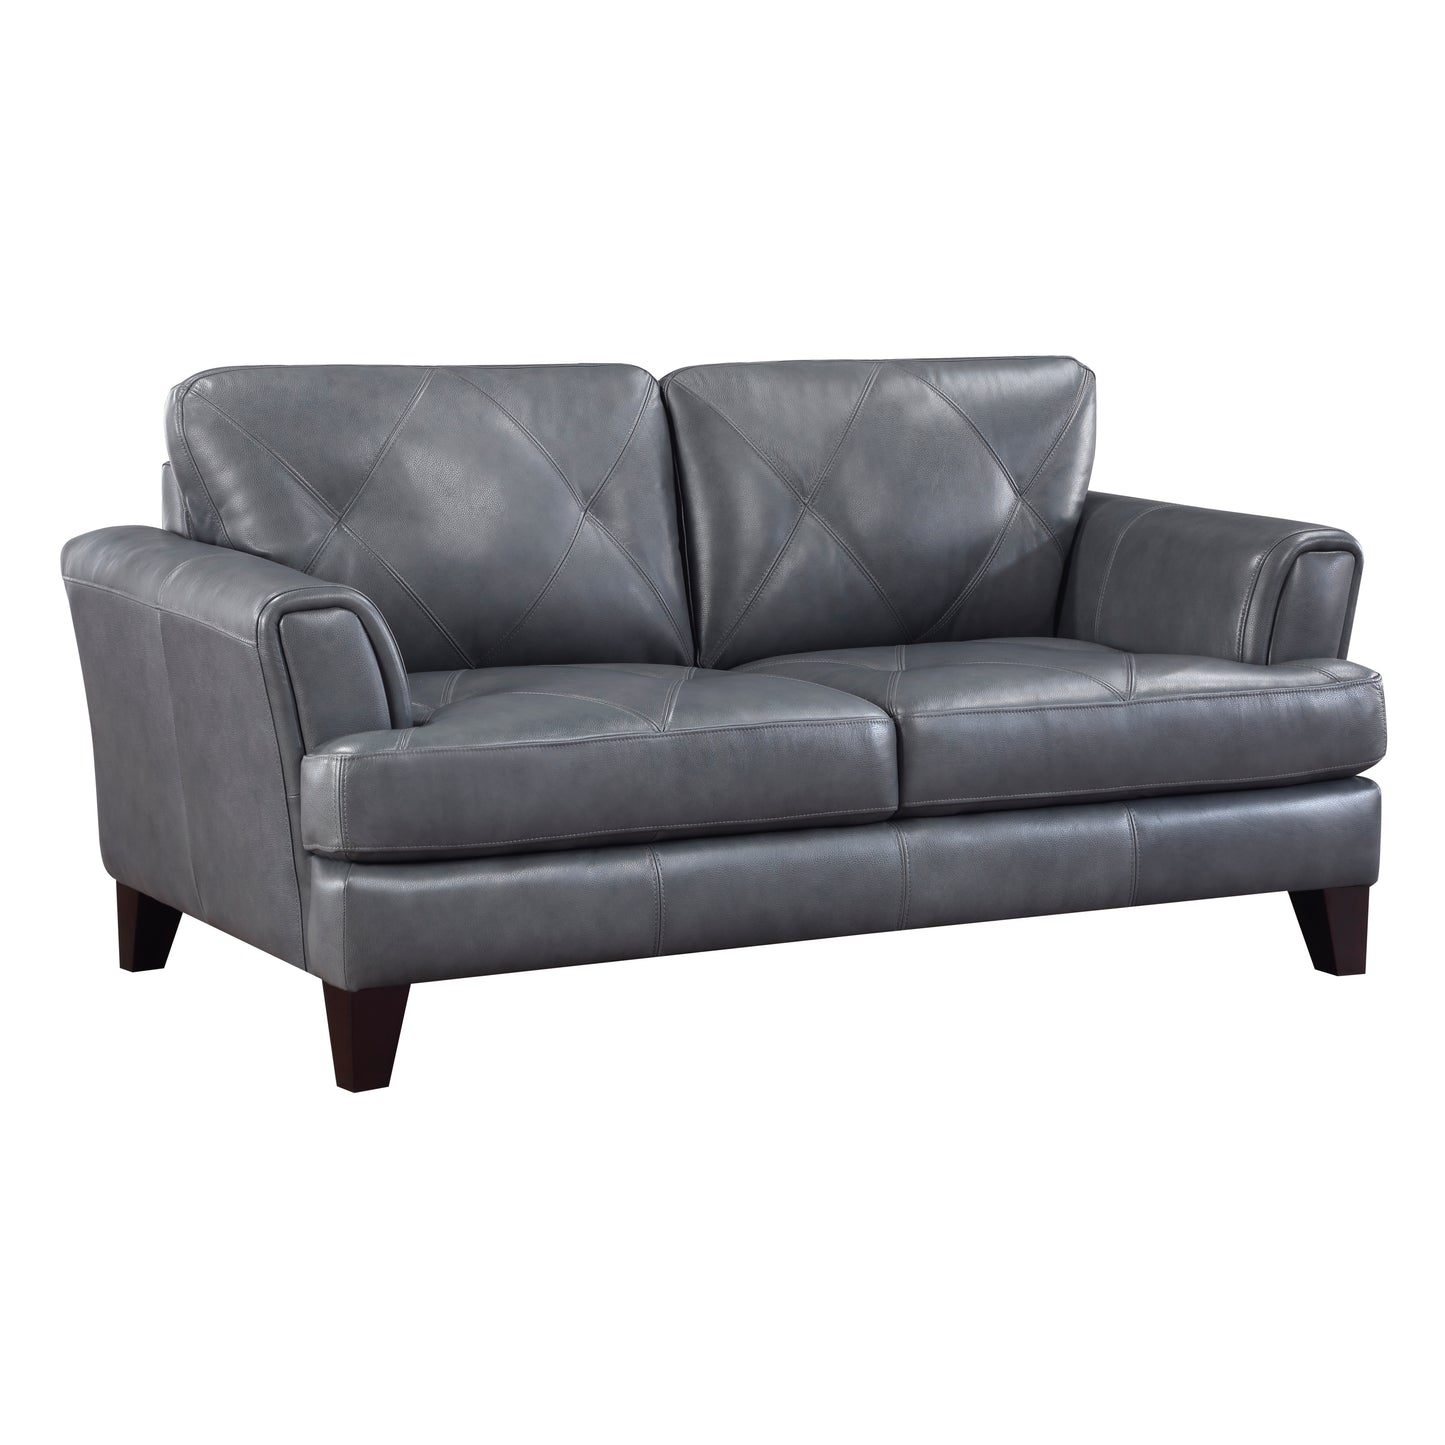 Thierry Top Grain Leather Sofa BLUE GREY